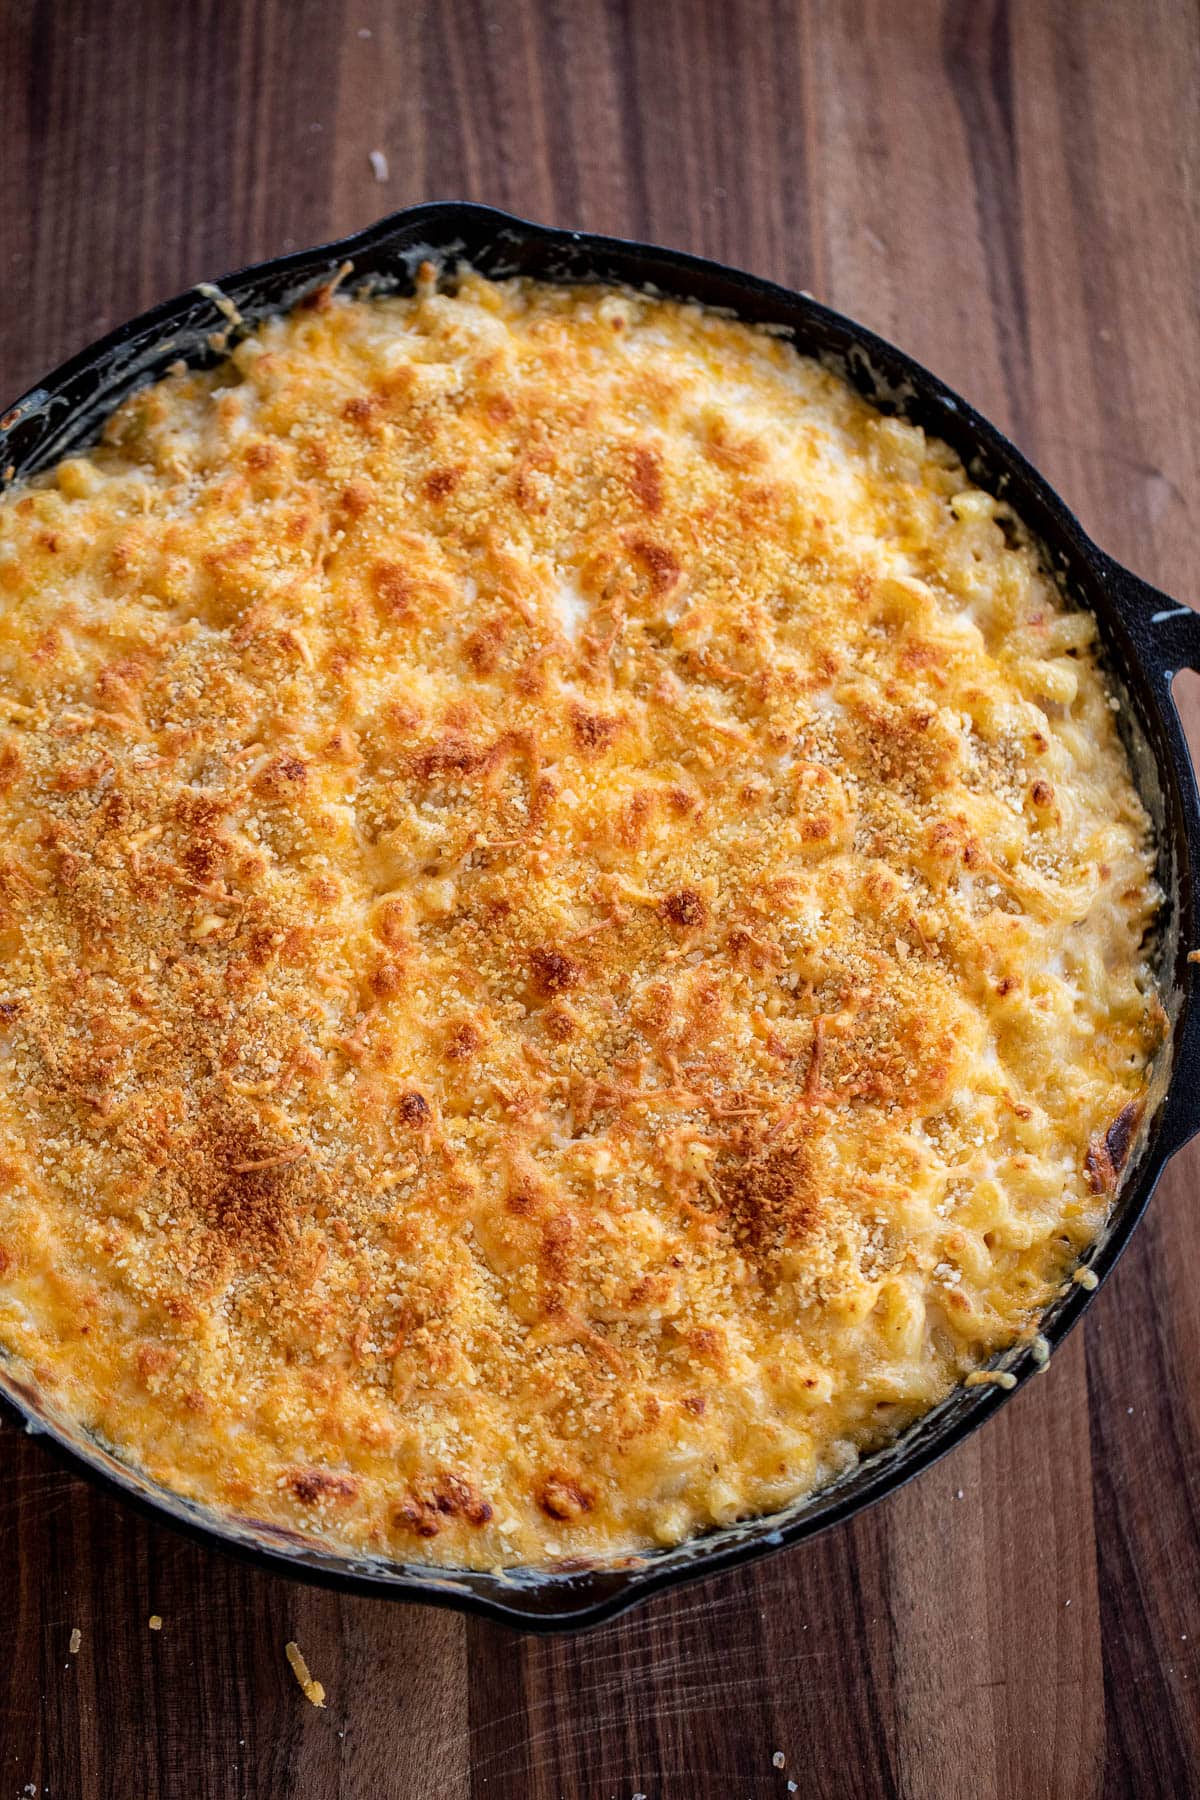 Baked mac and cheese with crunchy topping